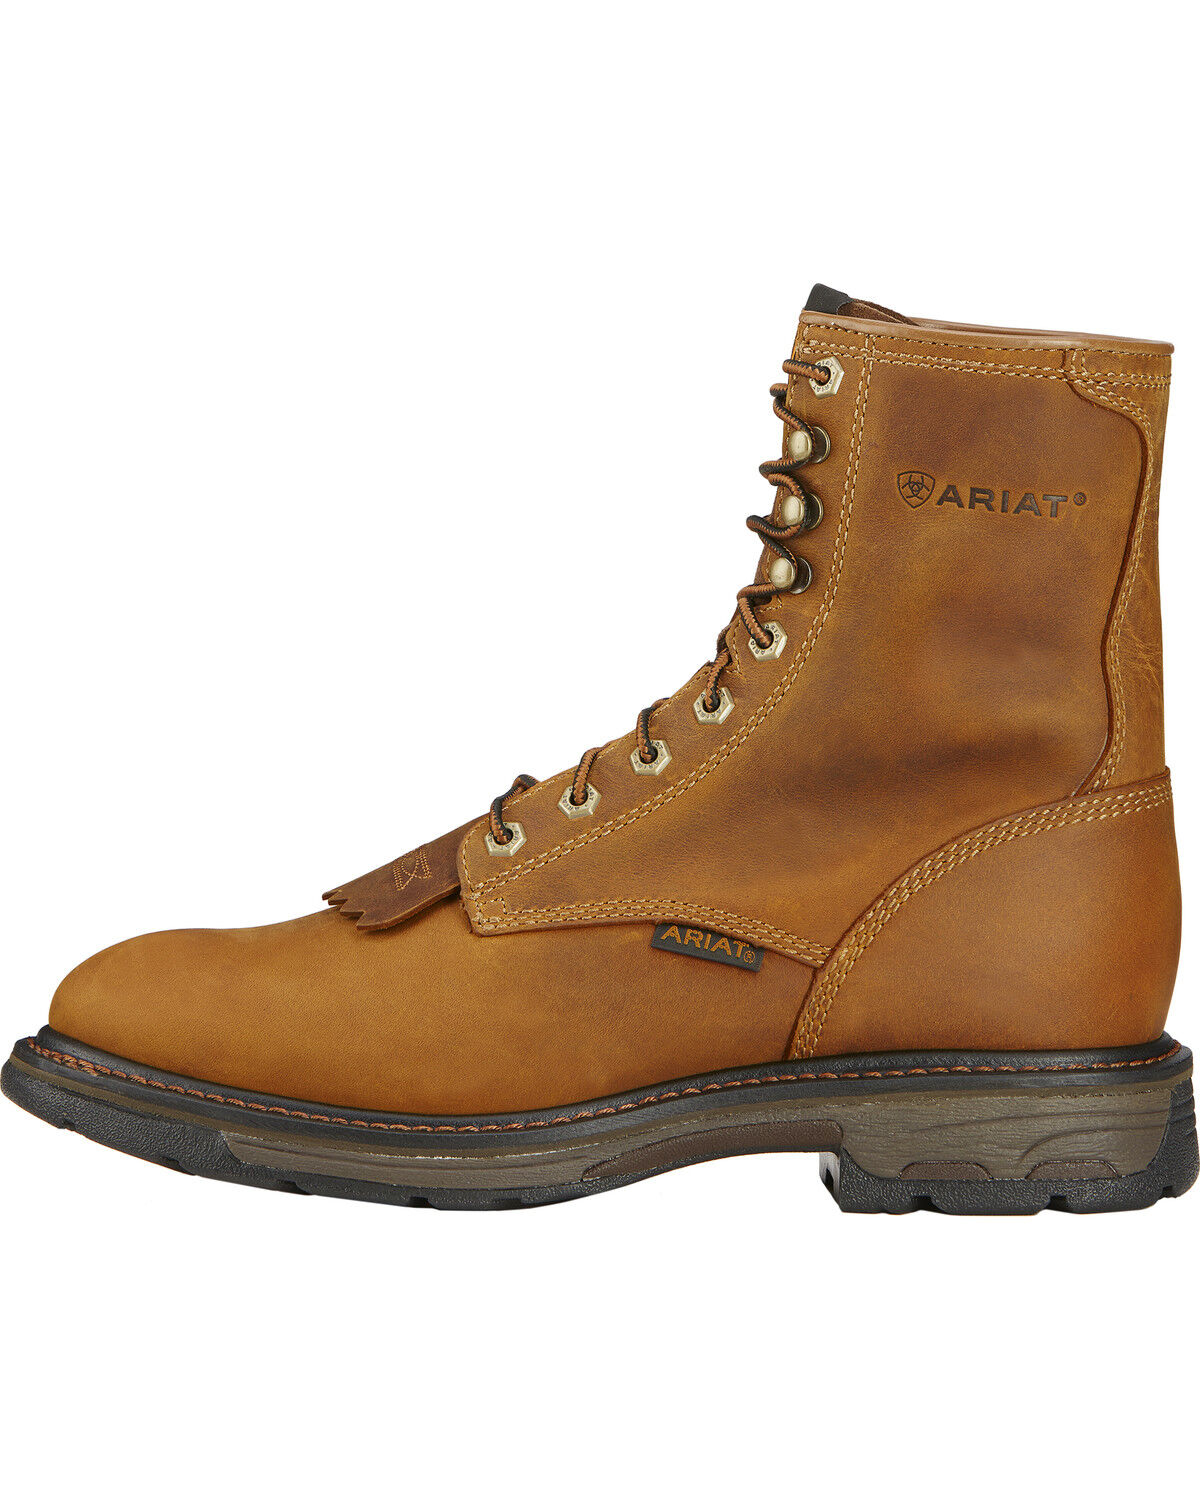 bnsf justin boots discount